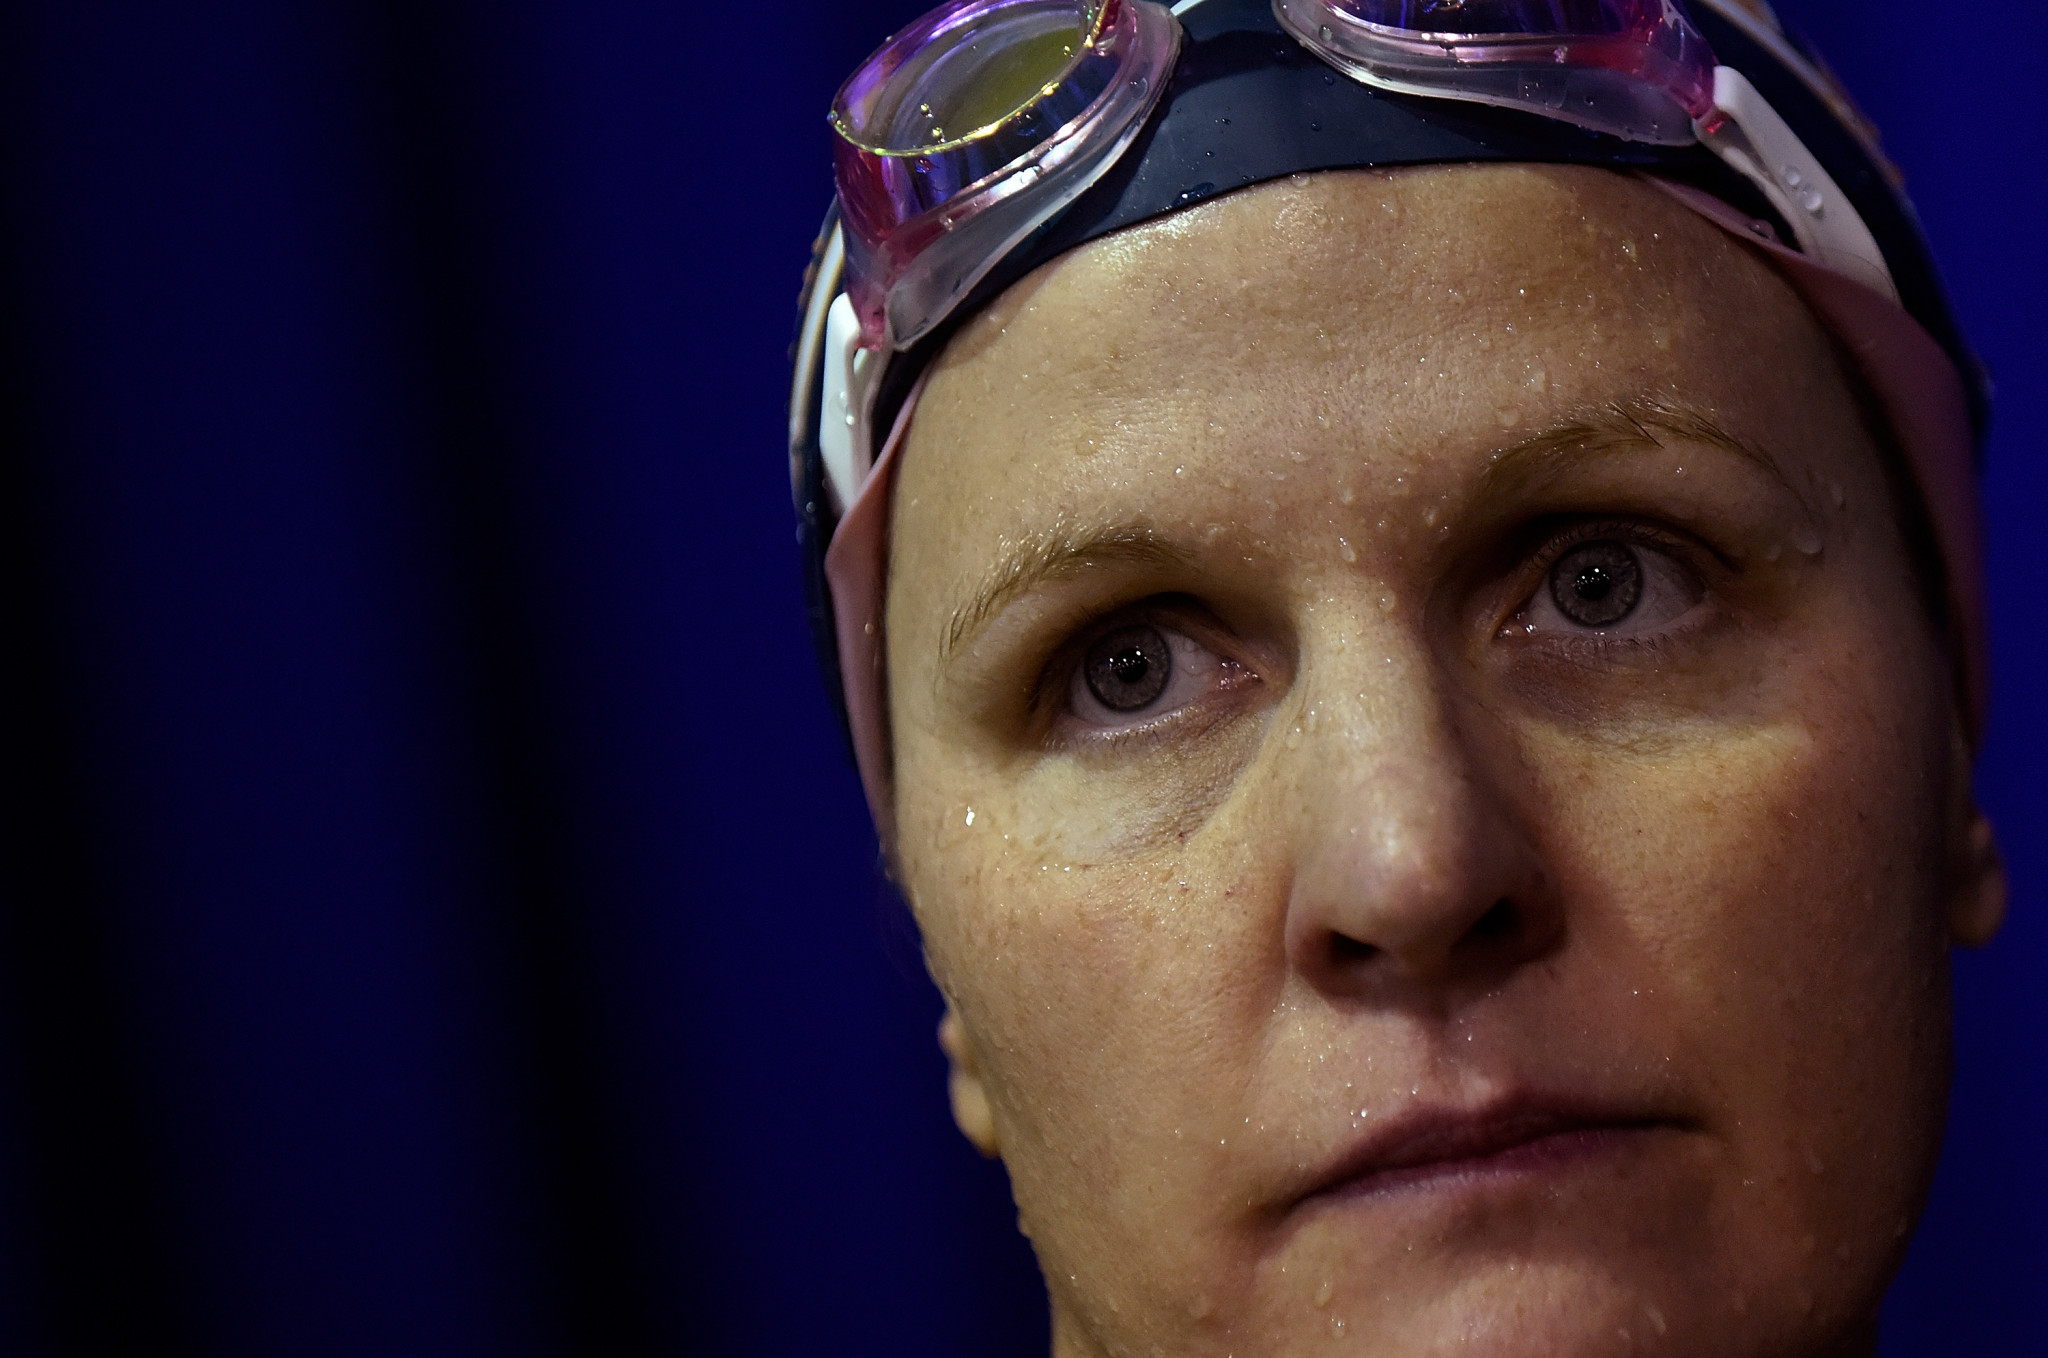 IOC Athletes' Commission chair Kirsty Coventry has been named as the chief guest and speaker at the Olympic Council of Asia’'s upcoming Athletes' Forum in Tokyo ©Getty Images